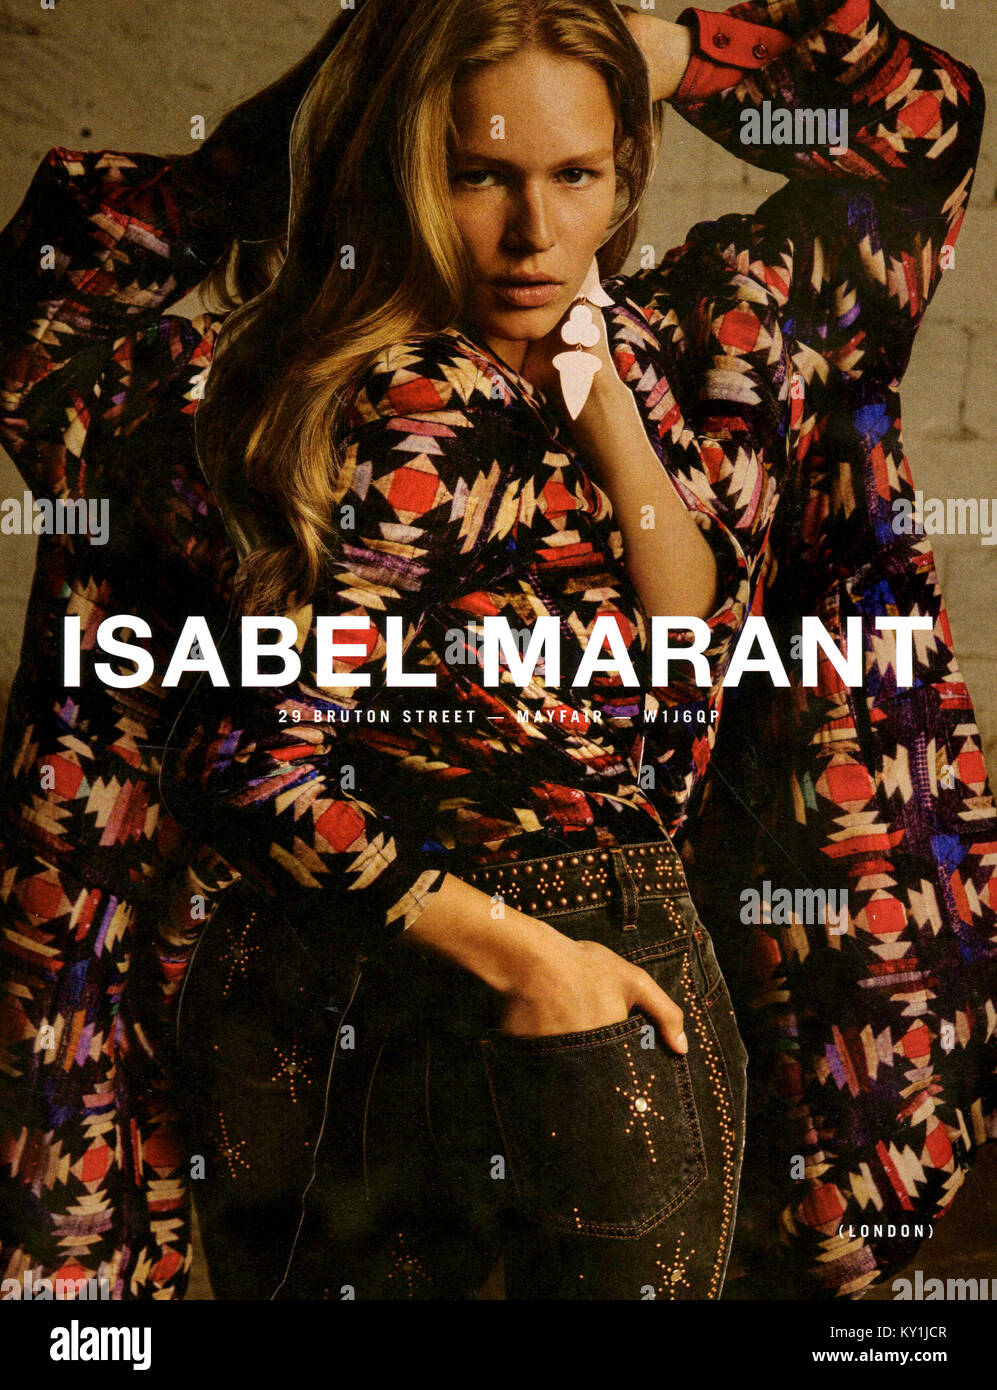 Isabel Marant High Resolution Stock Photography and Images - Alamy